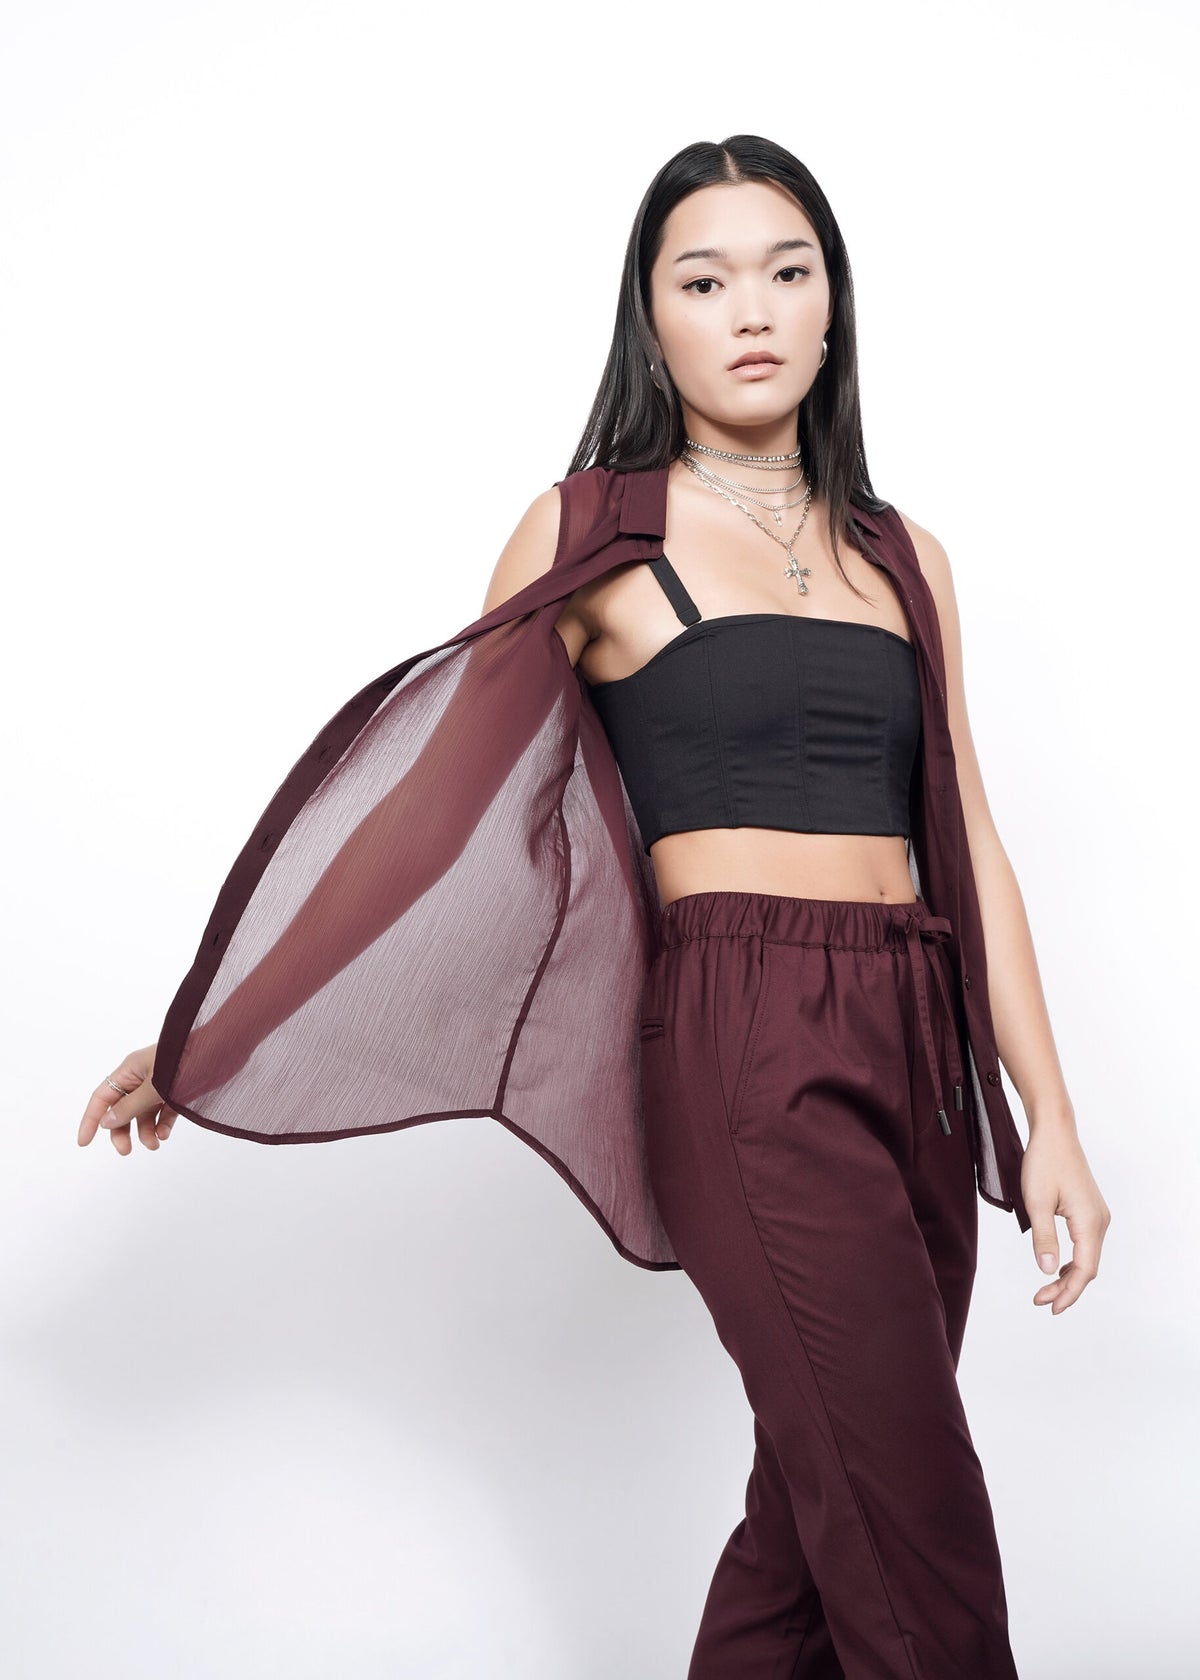 The Empower Sheer Sleeveless Button Up in Merlot